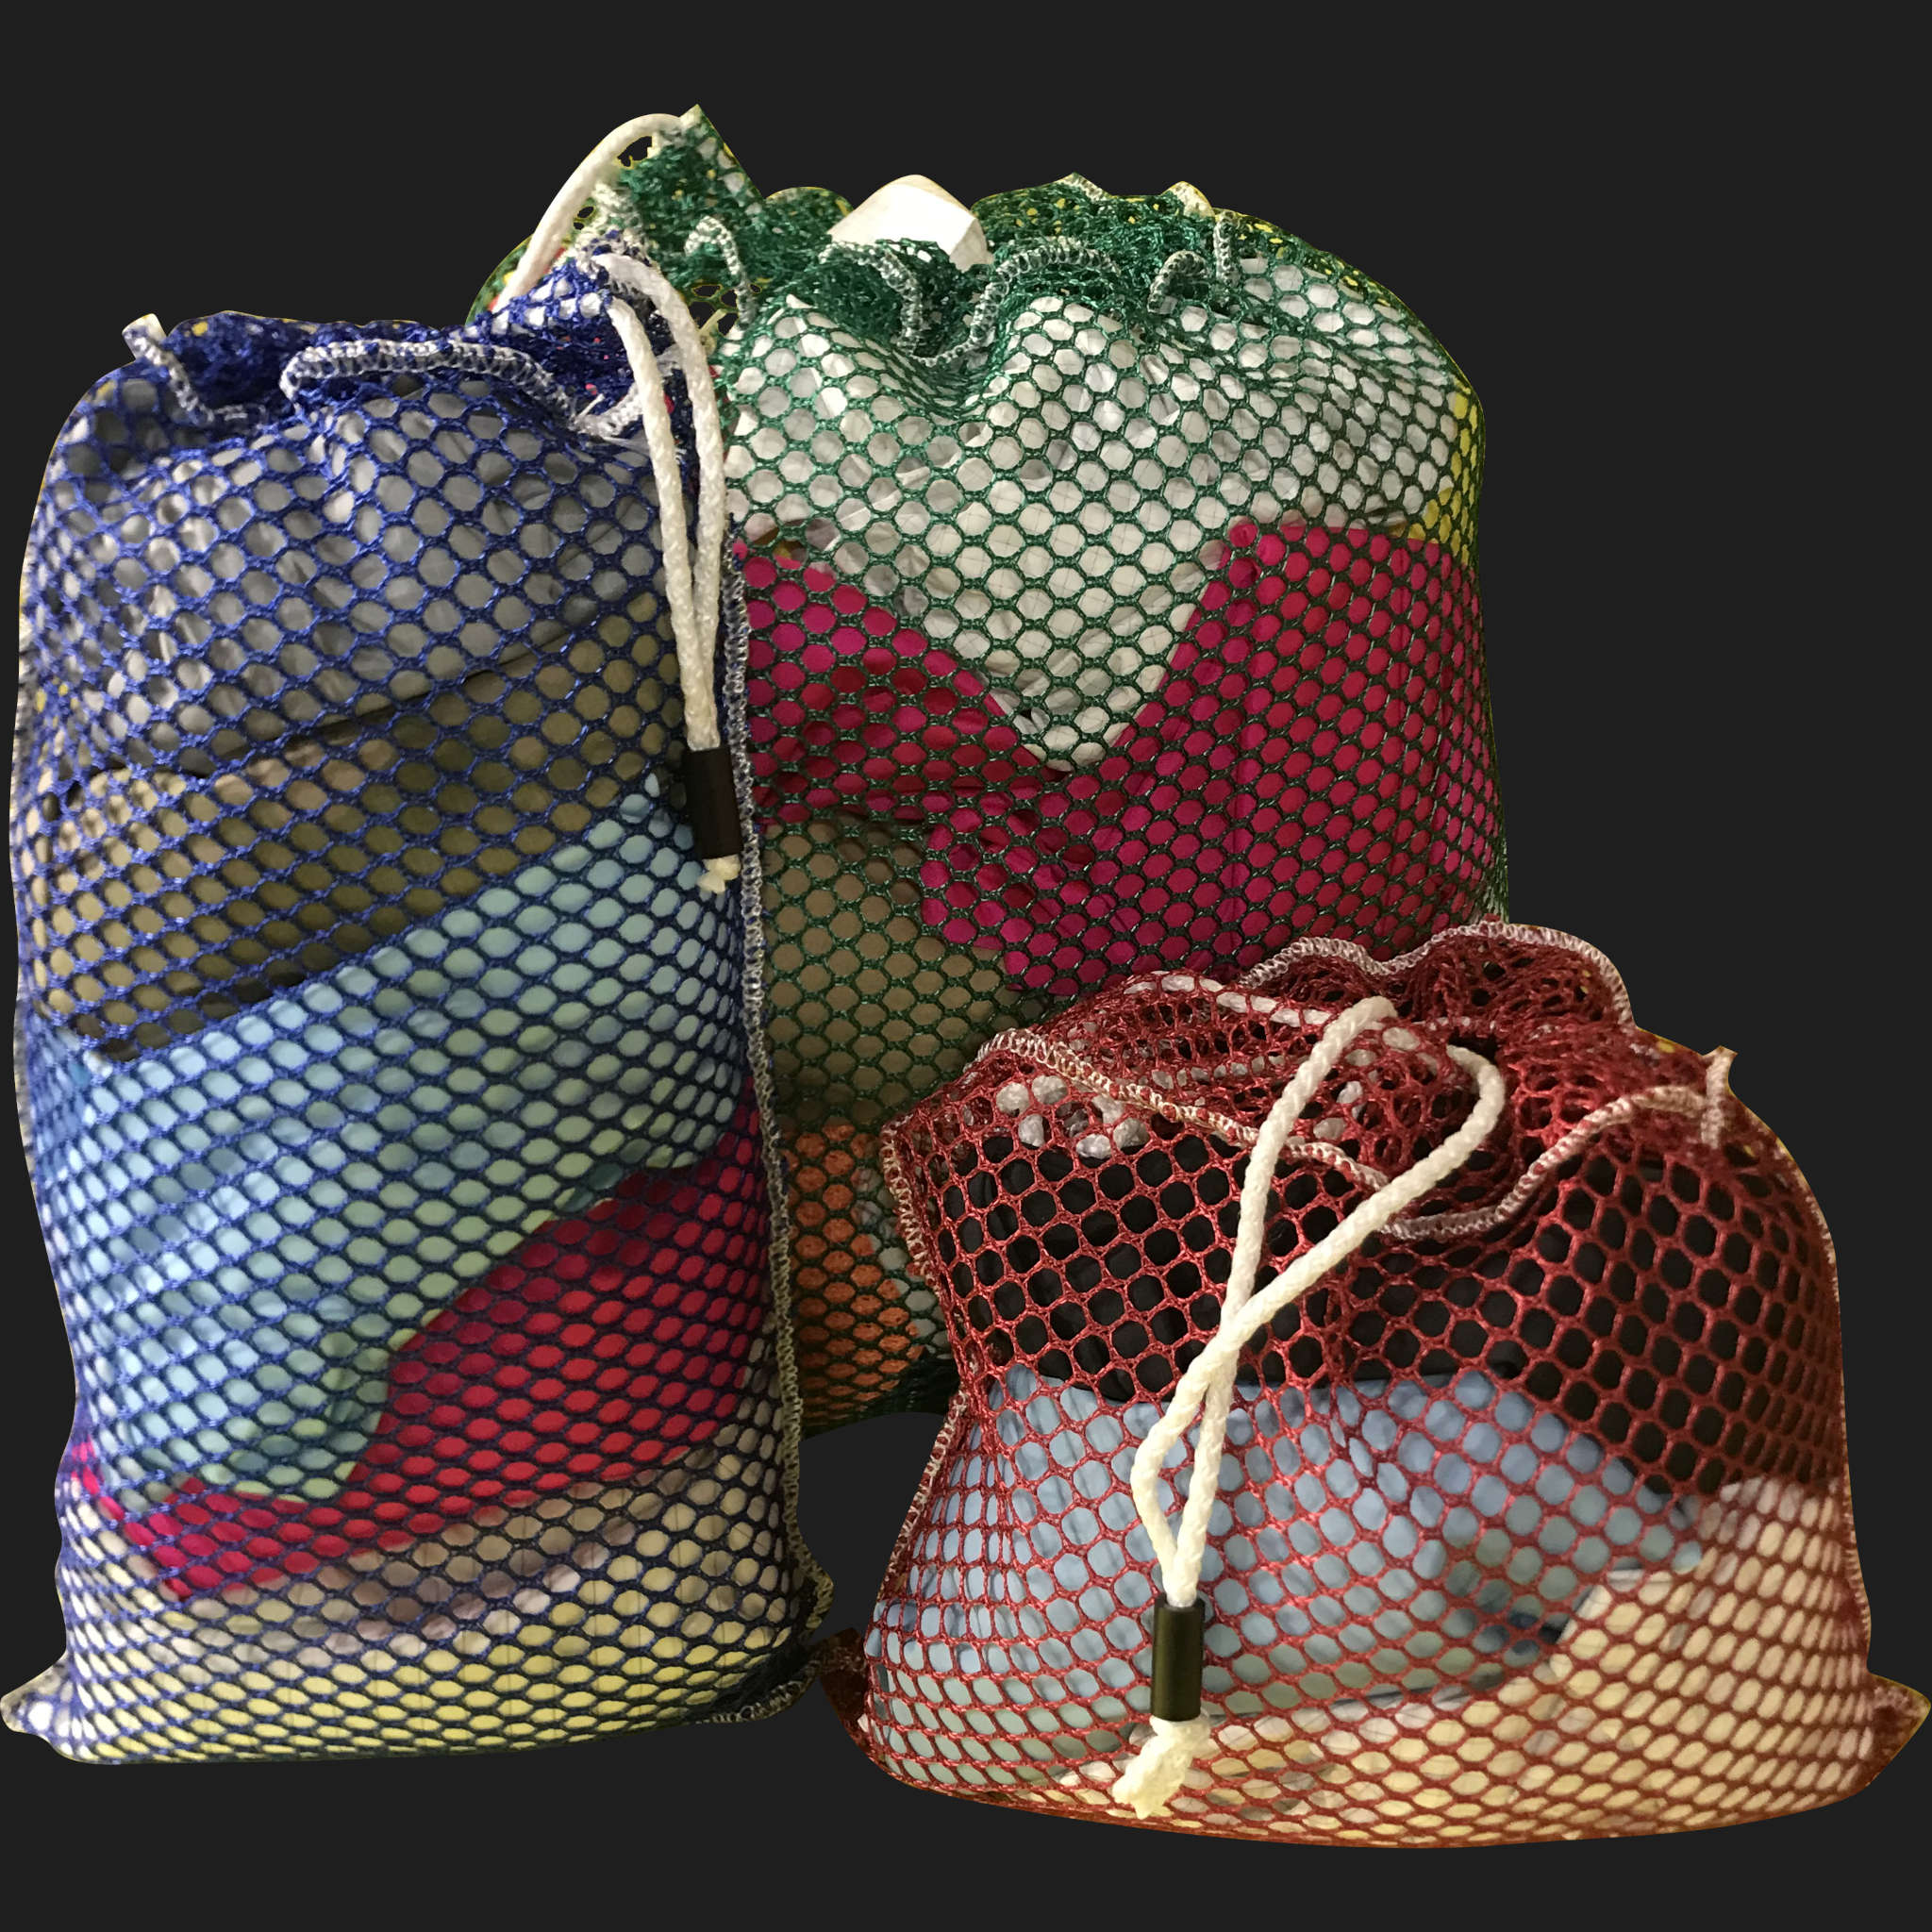 50" x 72" Customized Mesh-Net-Laundry Bags Heavy Duty with Cord and barrellock closure